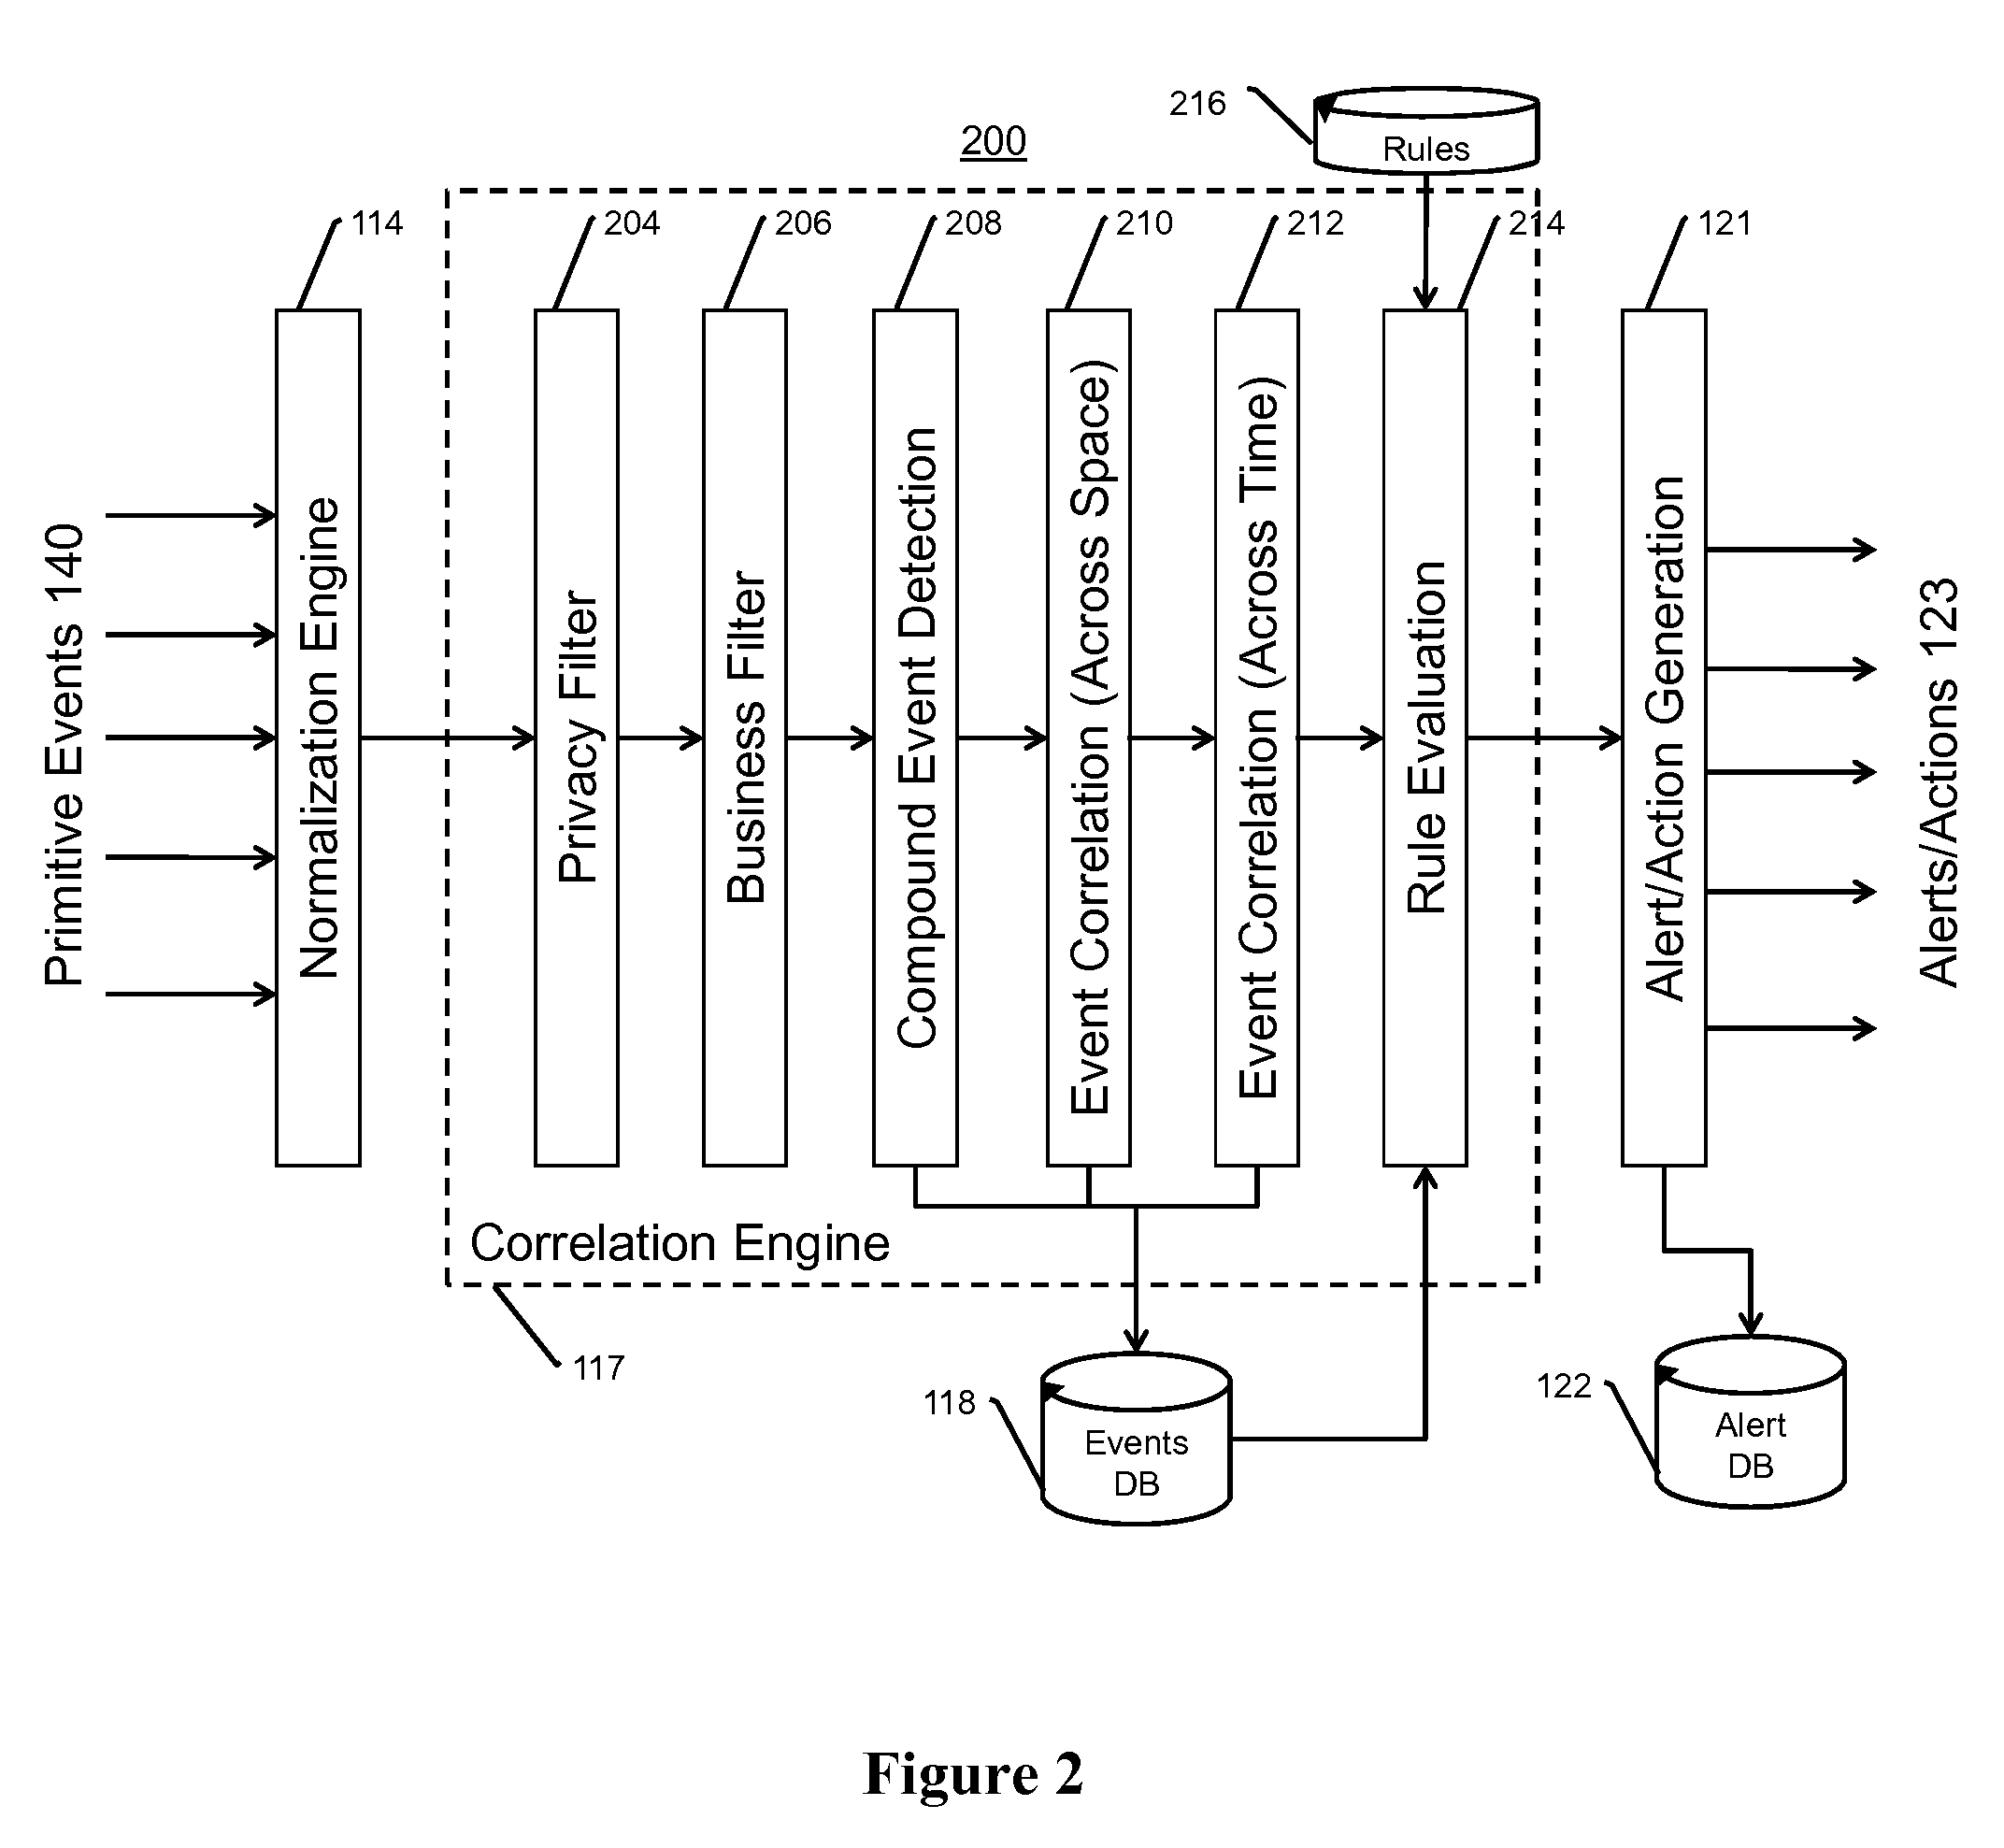 A hierarchical storage manager (HSM) for intelligent storage of large volumes of data